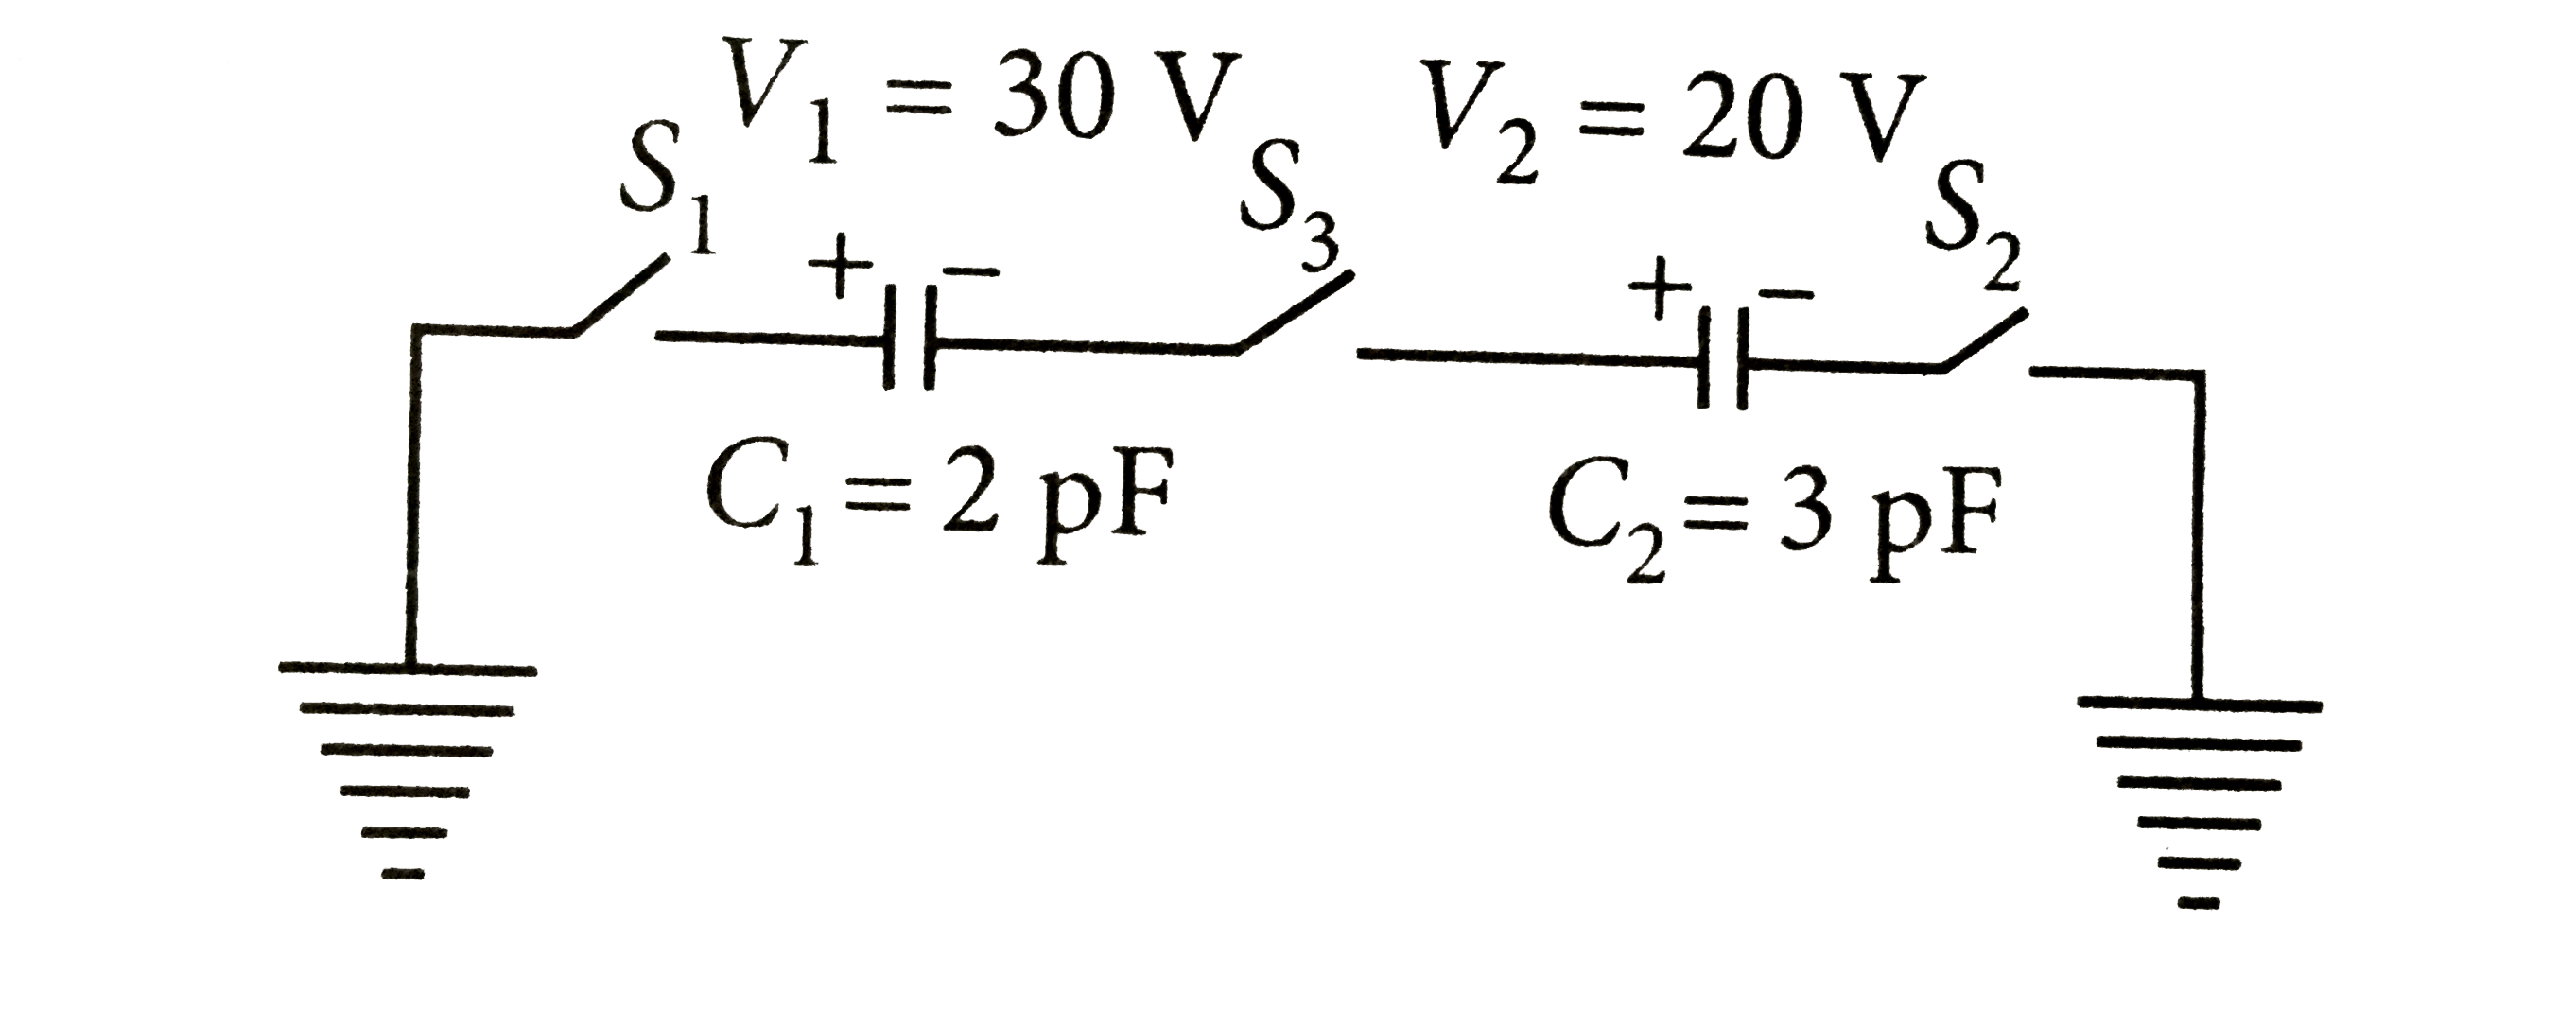 For the circuit shown in figure, which of the following statements is ture ?